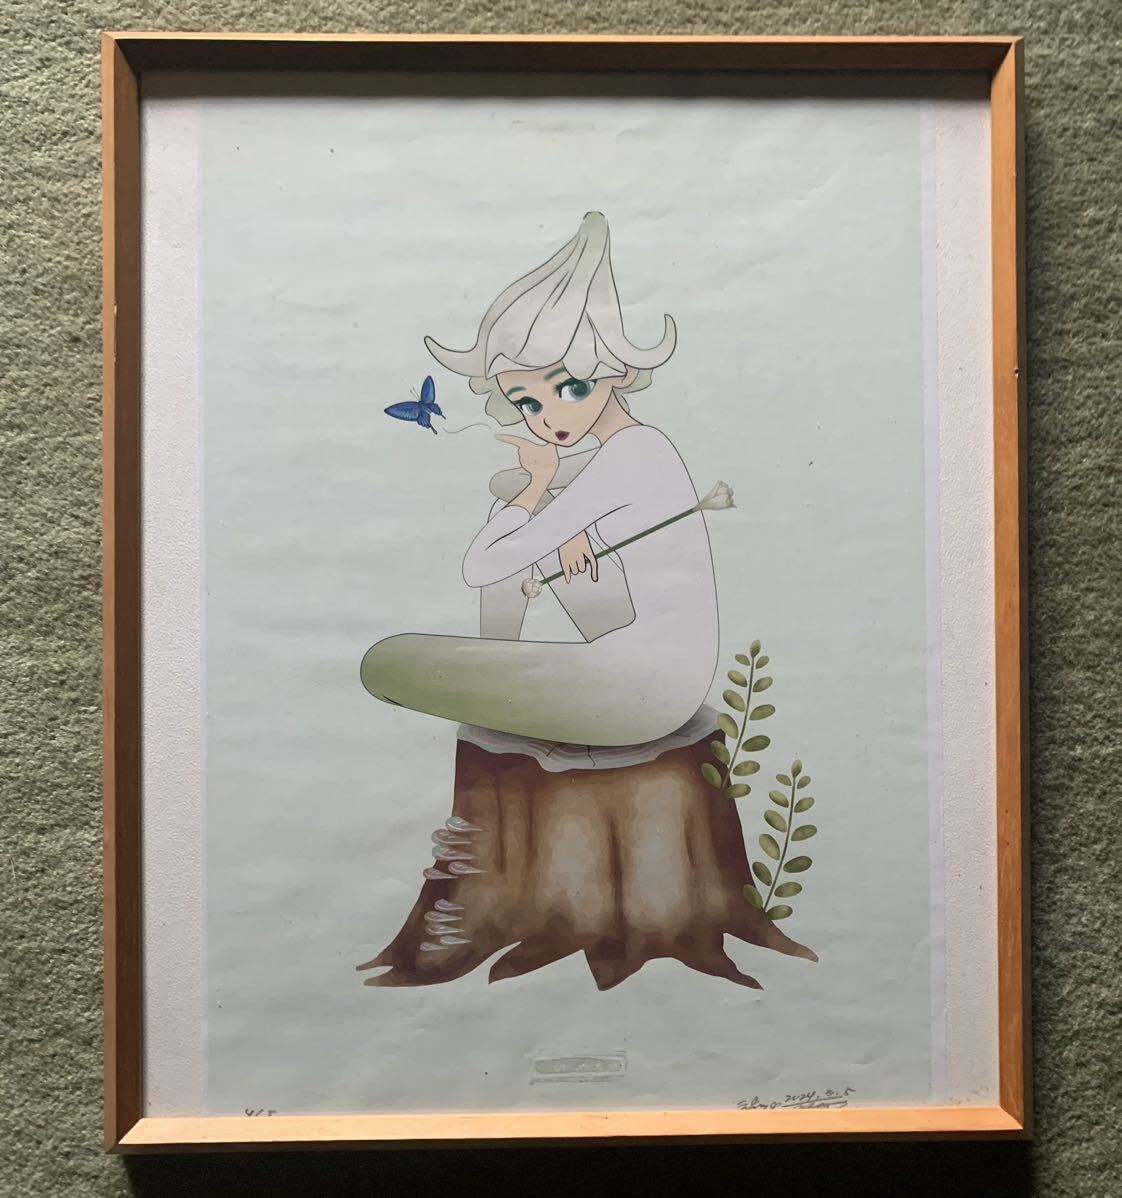 Flower Fairy Lily Moto Petch (Authentic) A3 size Print on demand High quality paper 4/5 lots Frame included Autographed by the author himself, artwork, painting, others